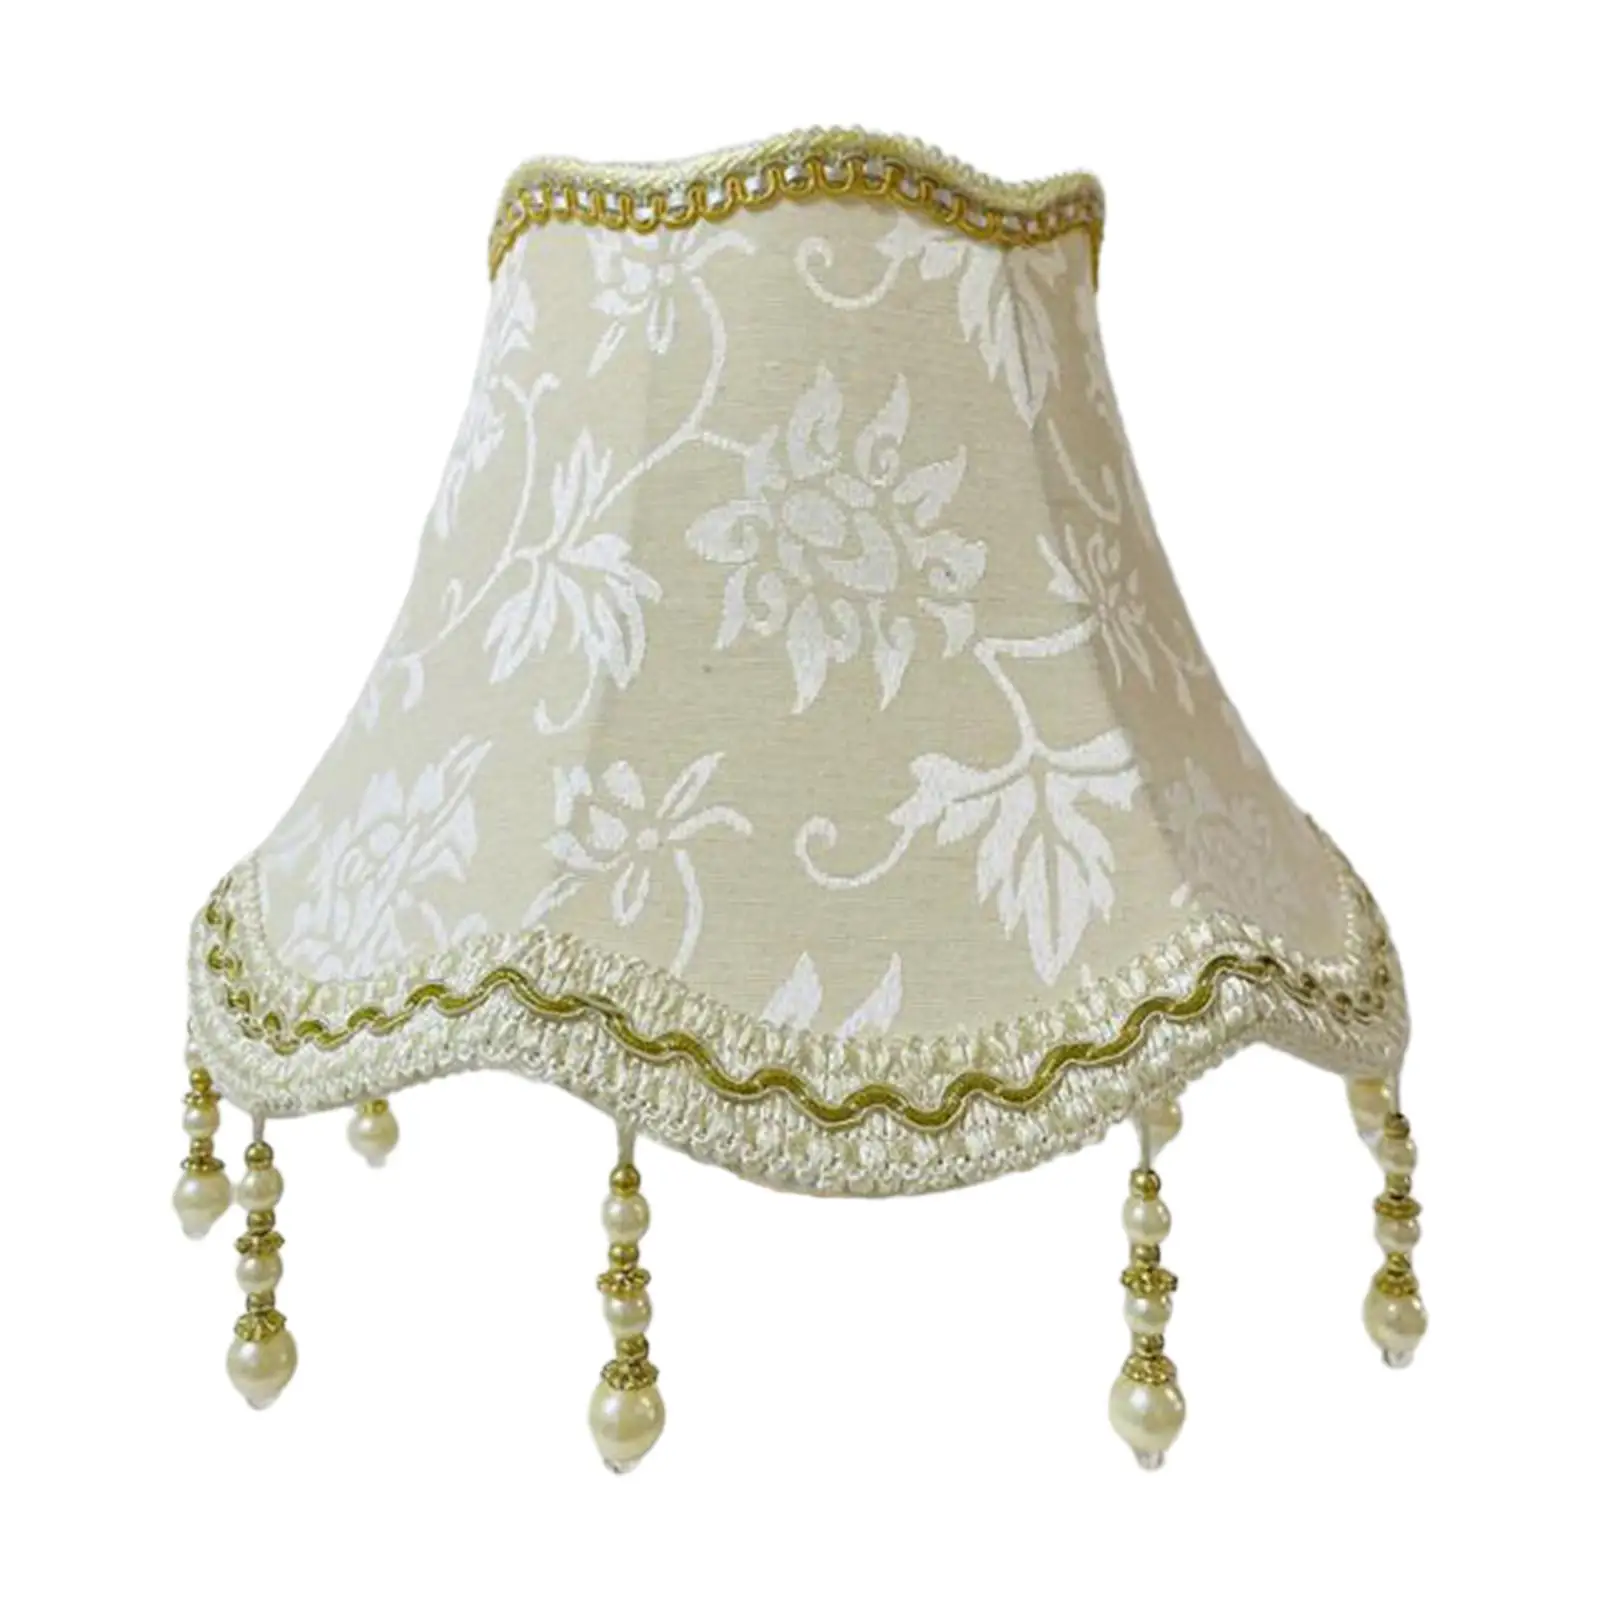 Fabric Lampshade Fringe Lamp Shade for Teahouse Kitchen Island Dining Room